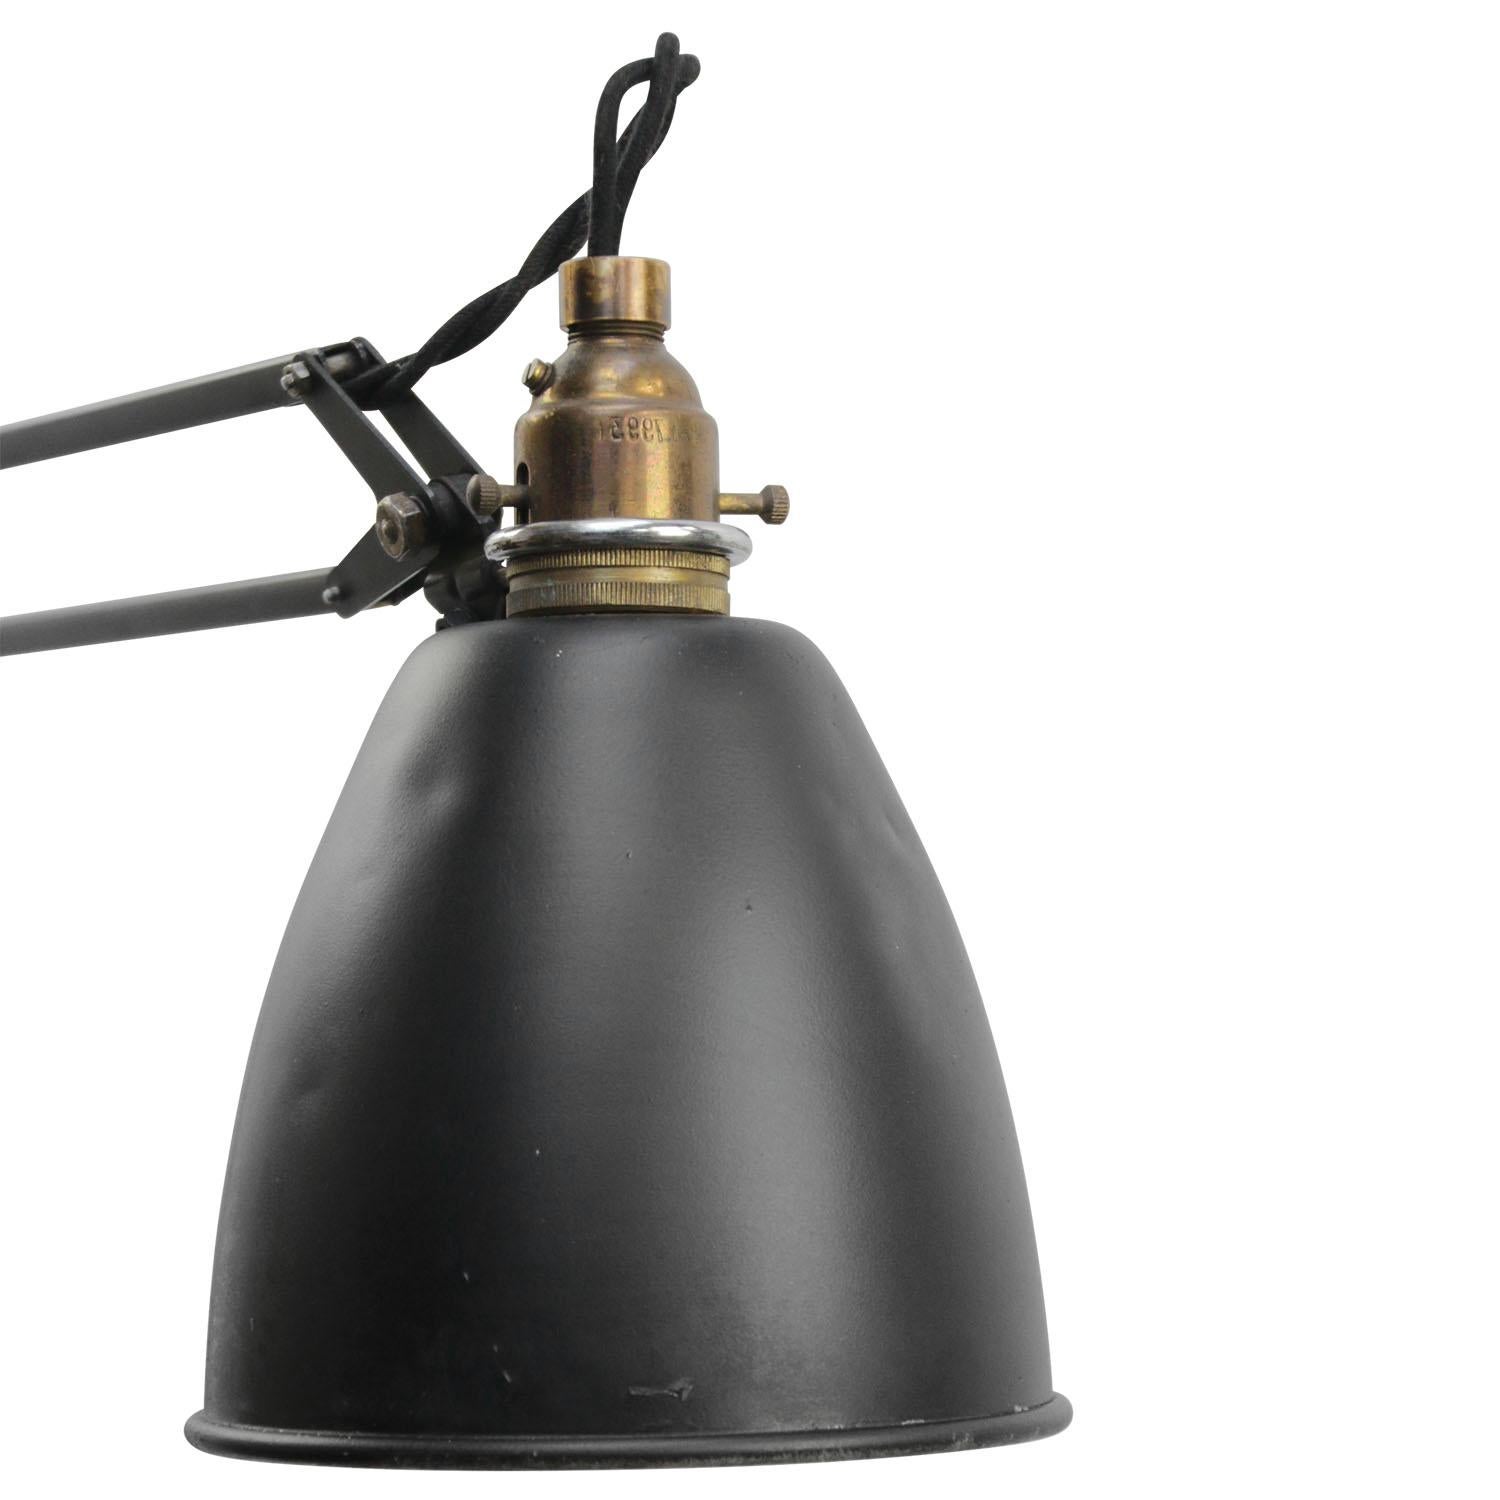 British Aluminum and Iron Anglepoise 1208 Table Lamp from Herbert Terry & Sons